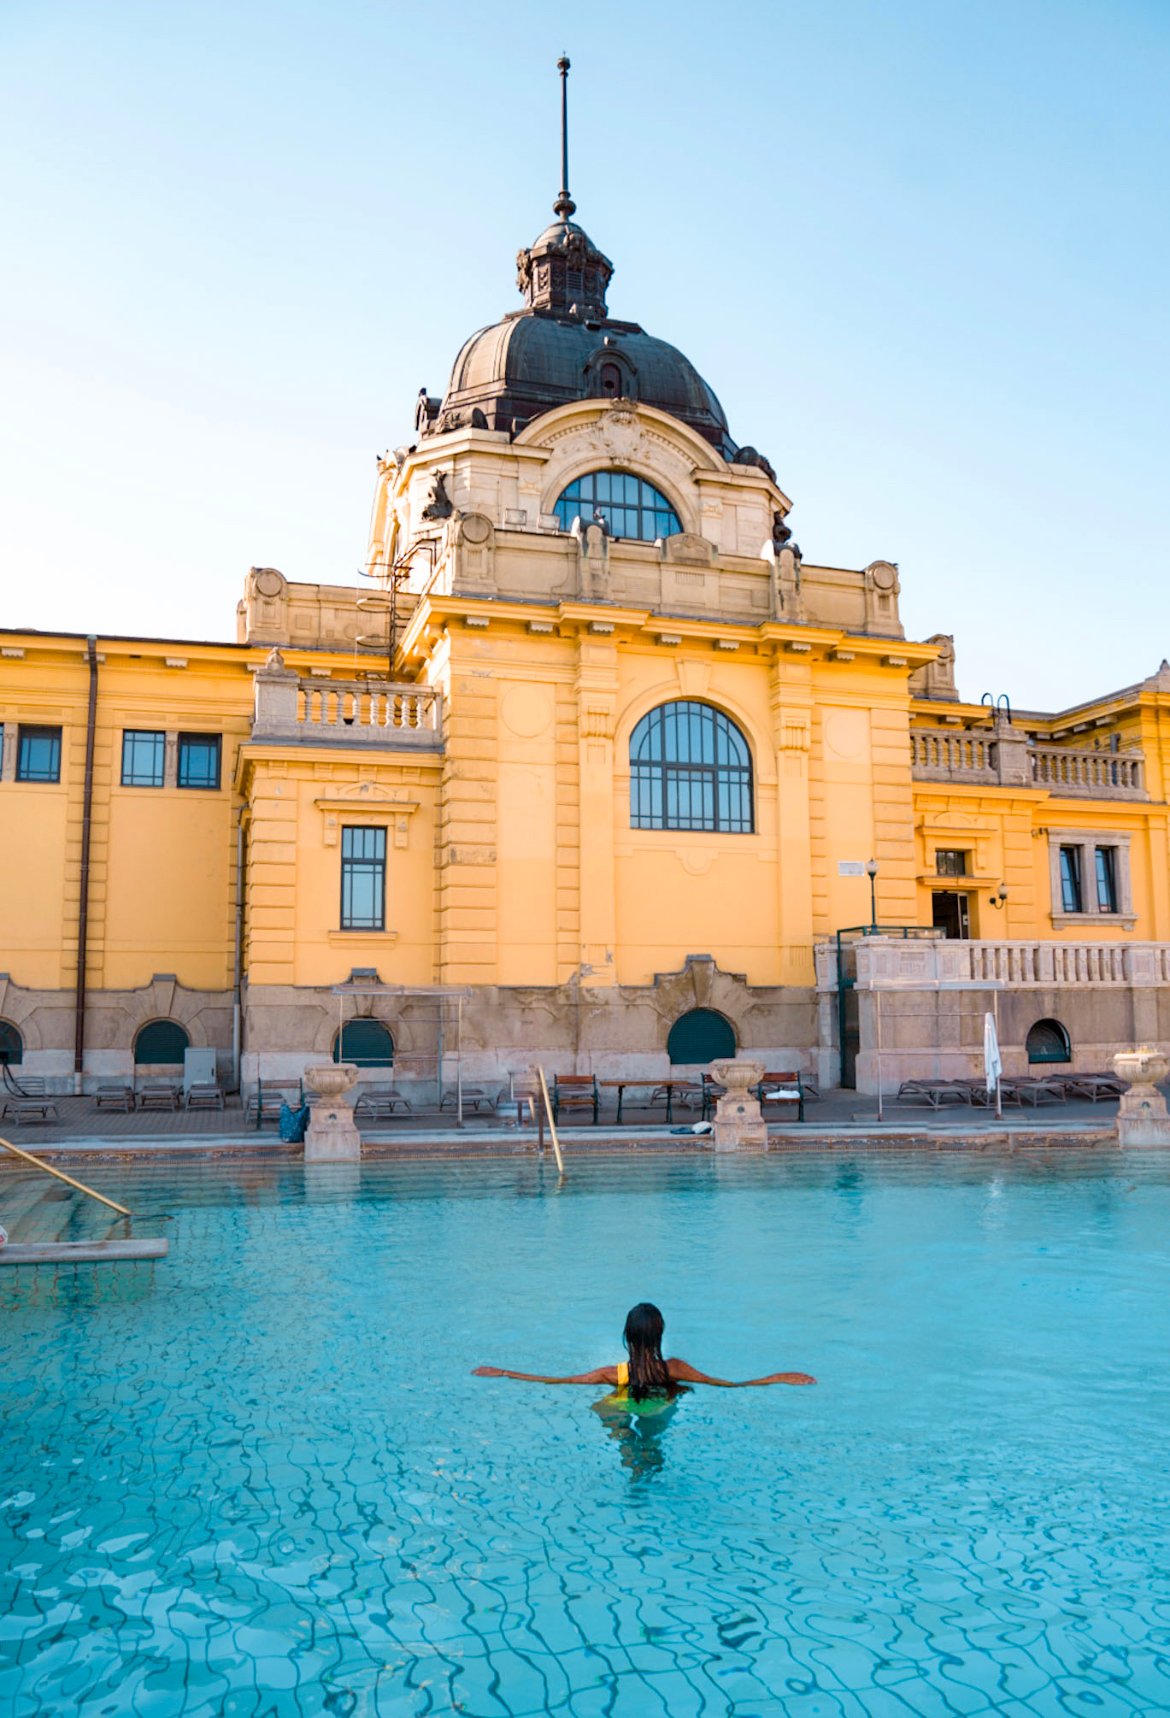 Szechenyi Baths, 10 top things to do in Budapest